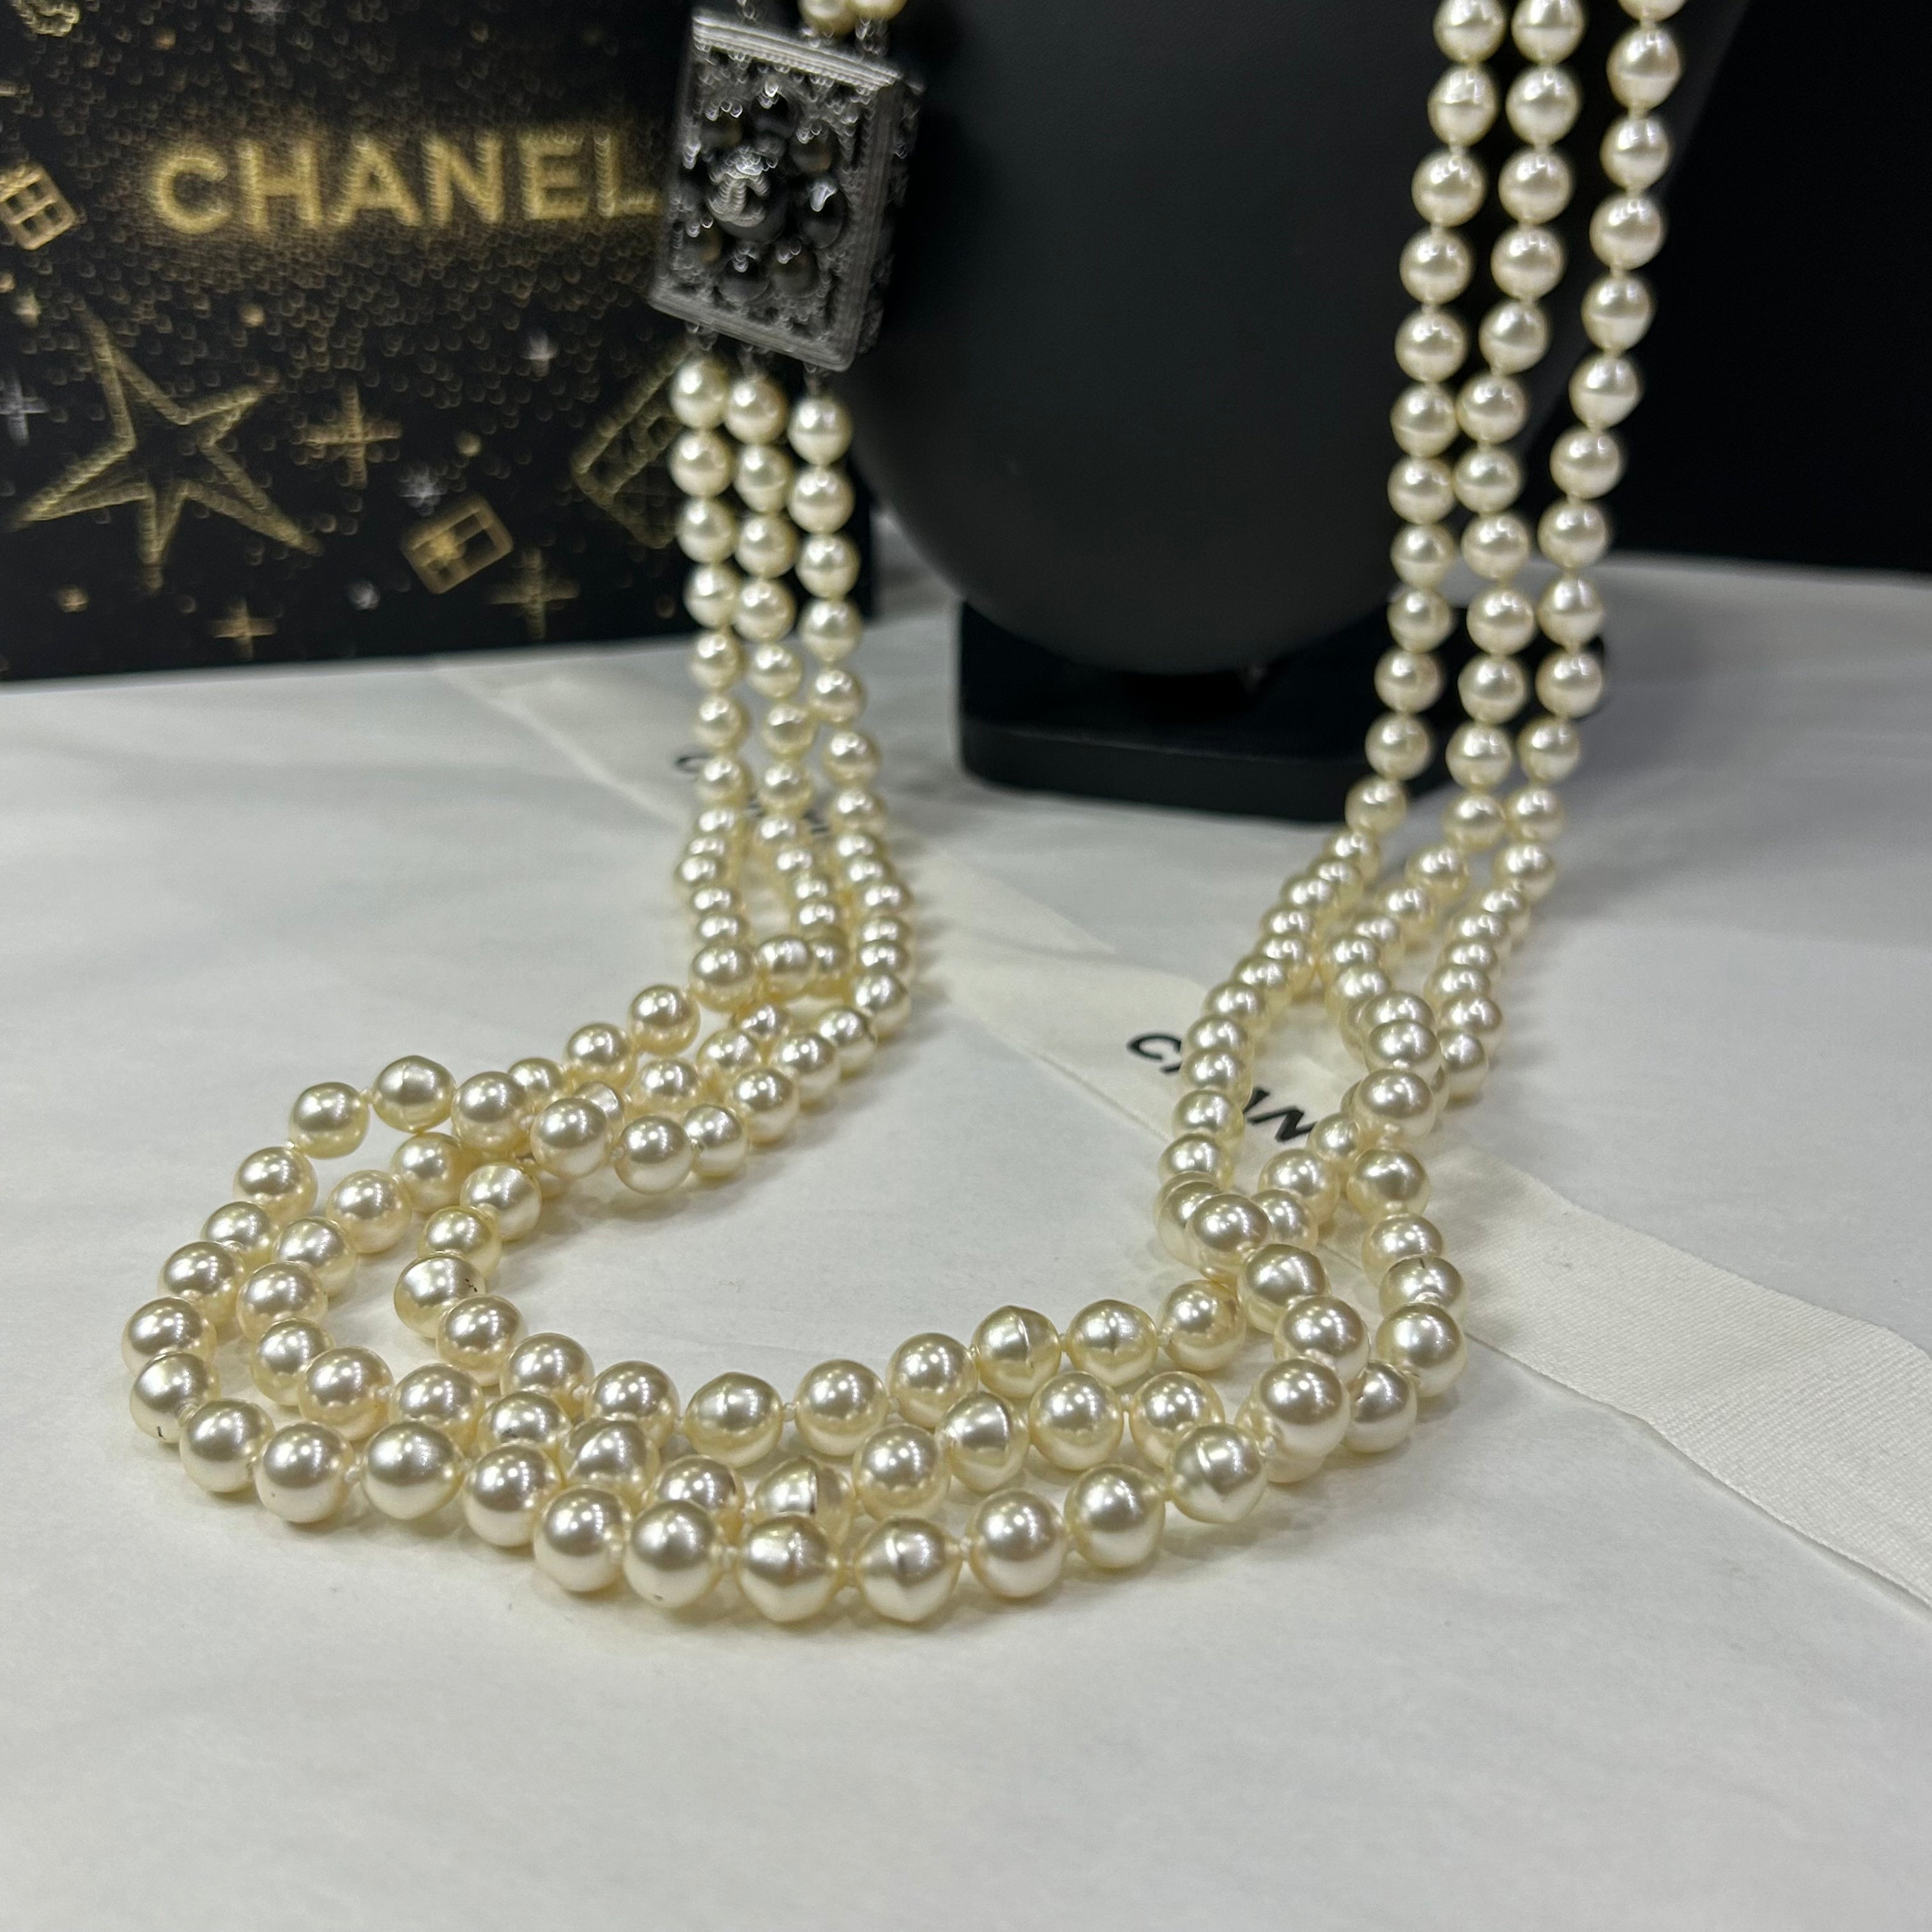 Chanel - Triple row long necklace